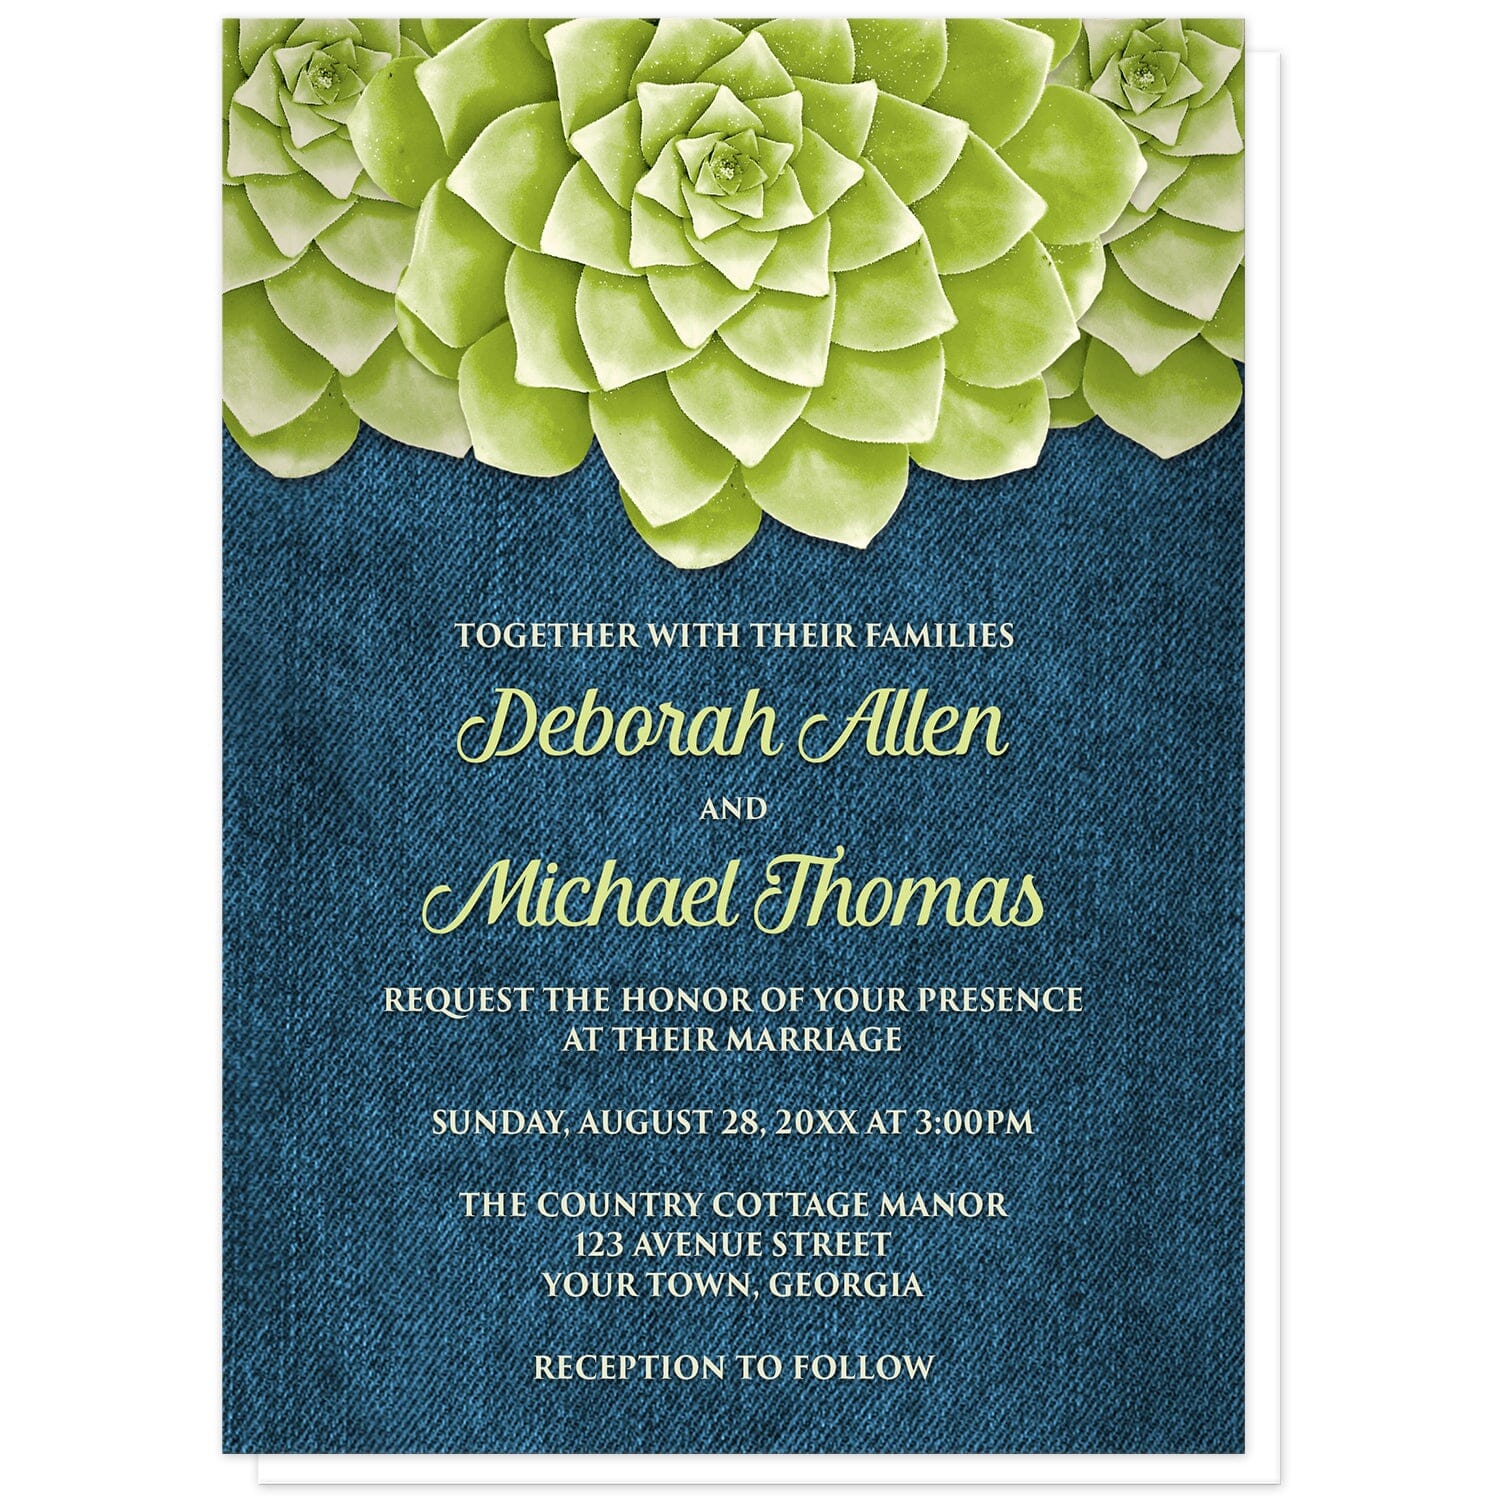 Succulent Green Blue Denim Wedding Invitations at Artistically Invited. Cool and fresh succulent green blue denim wedding invitations with three large green succulents along the top of the invitations over a rustic blue denim background design. Your personalized marriage celebration details are custom printed in green and light green over the denim background below the succulents. 